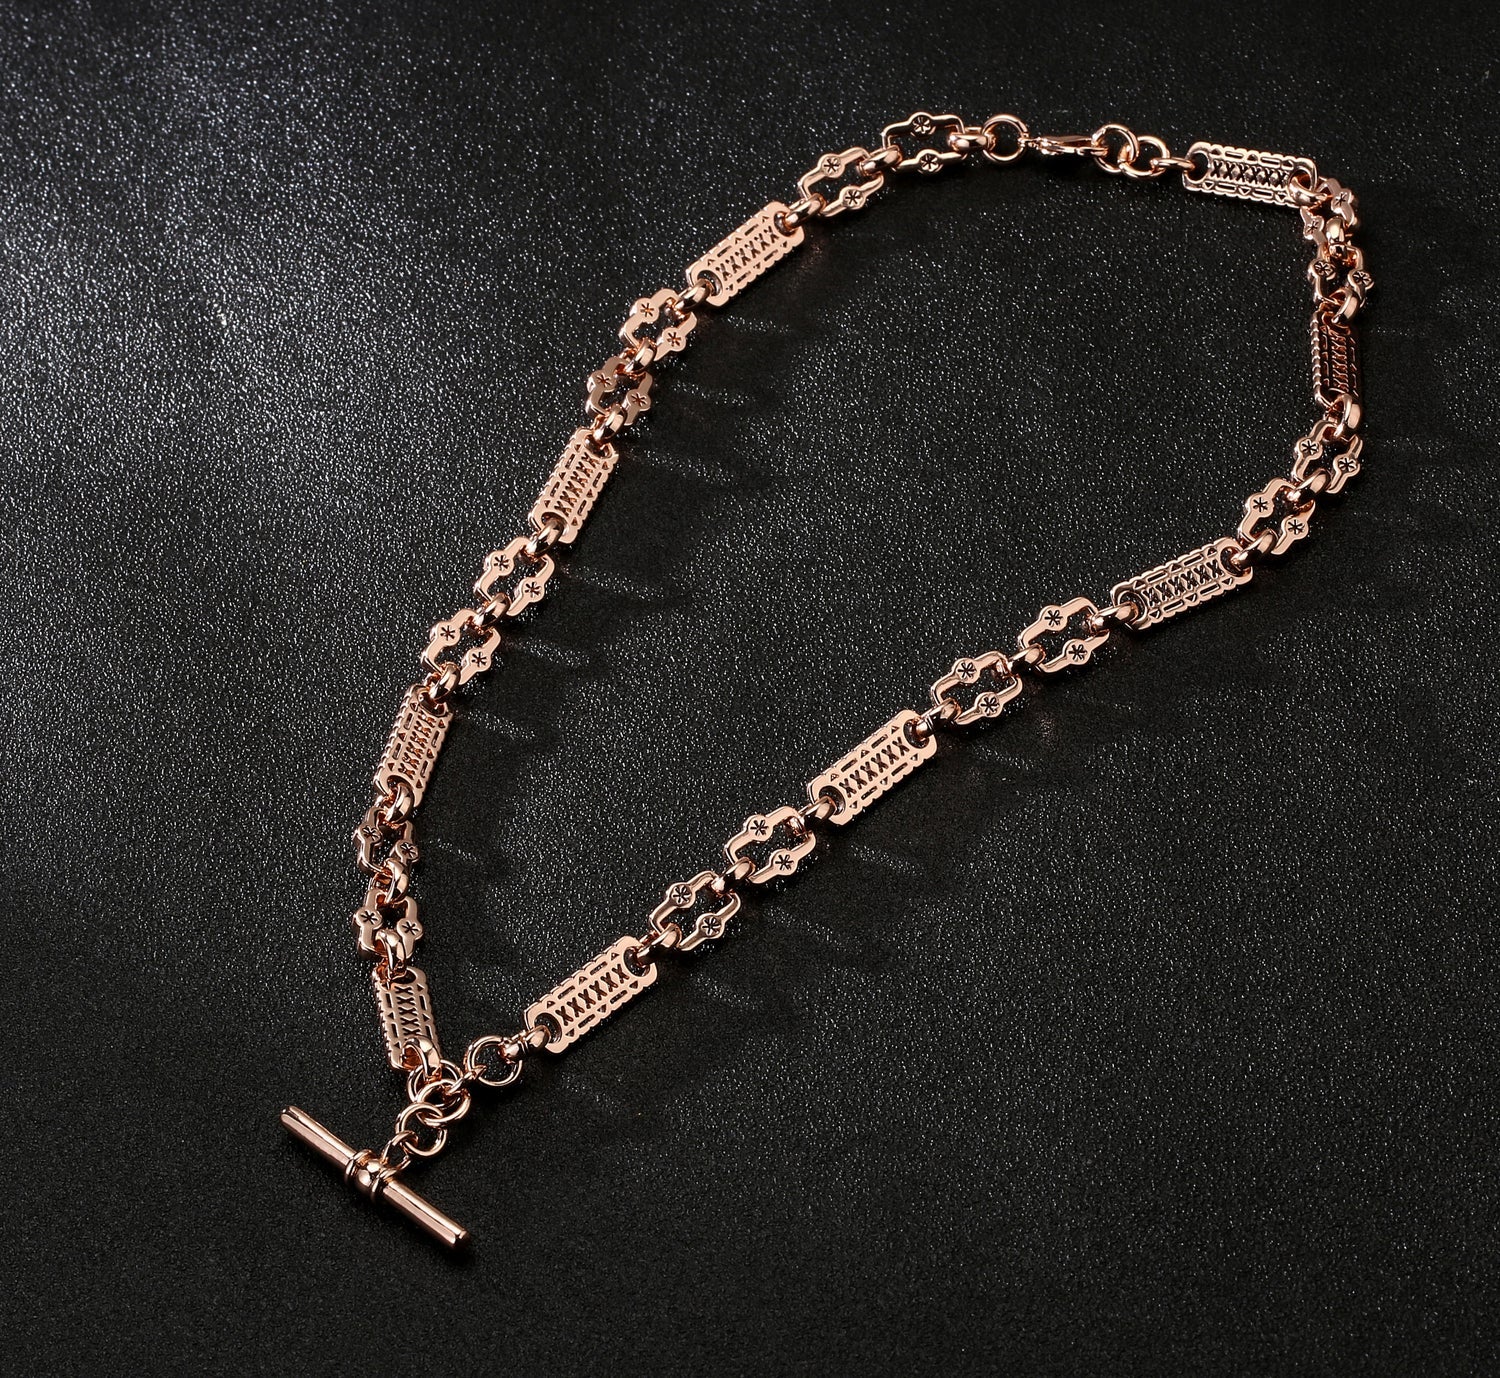 ROSE GOLD STARS AND BARS NECKLACE WITH T-BAR